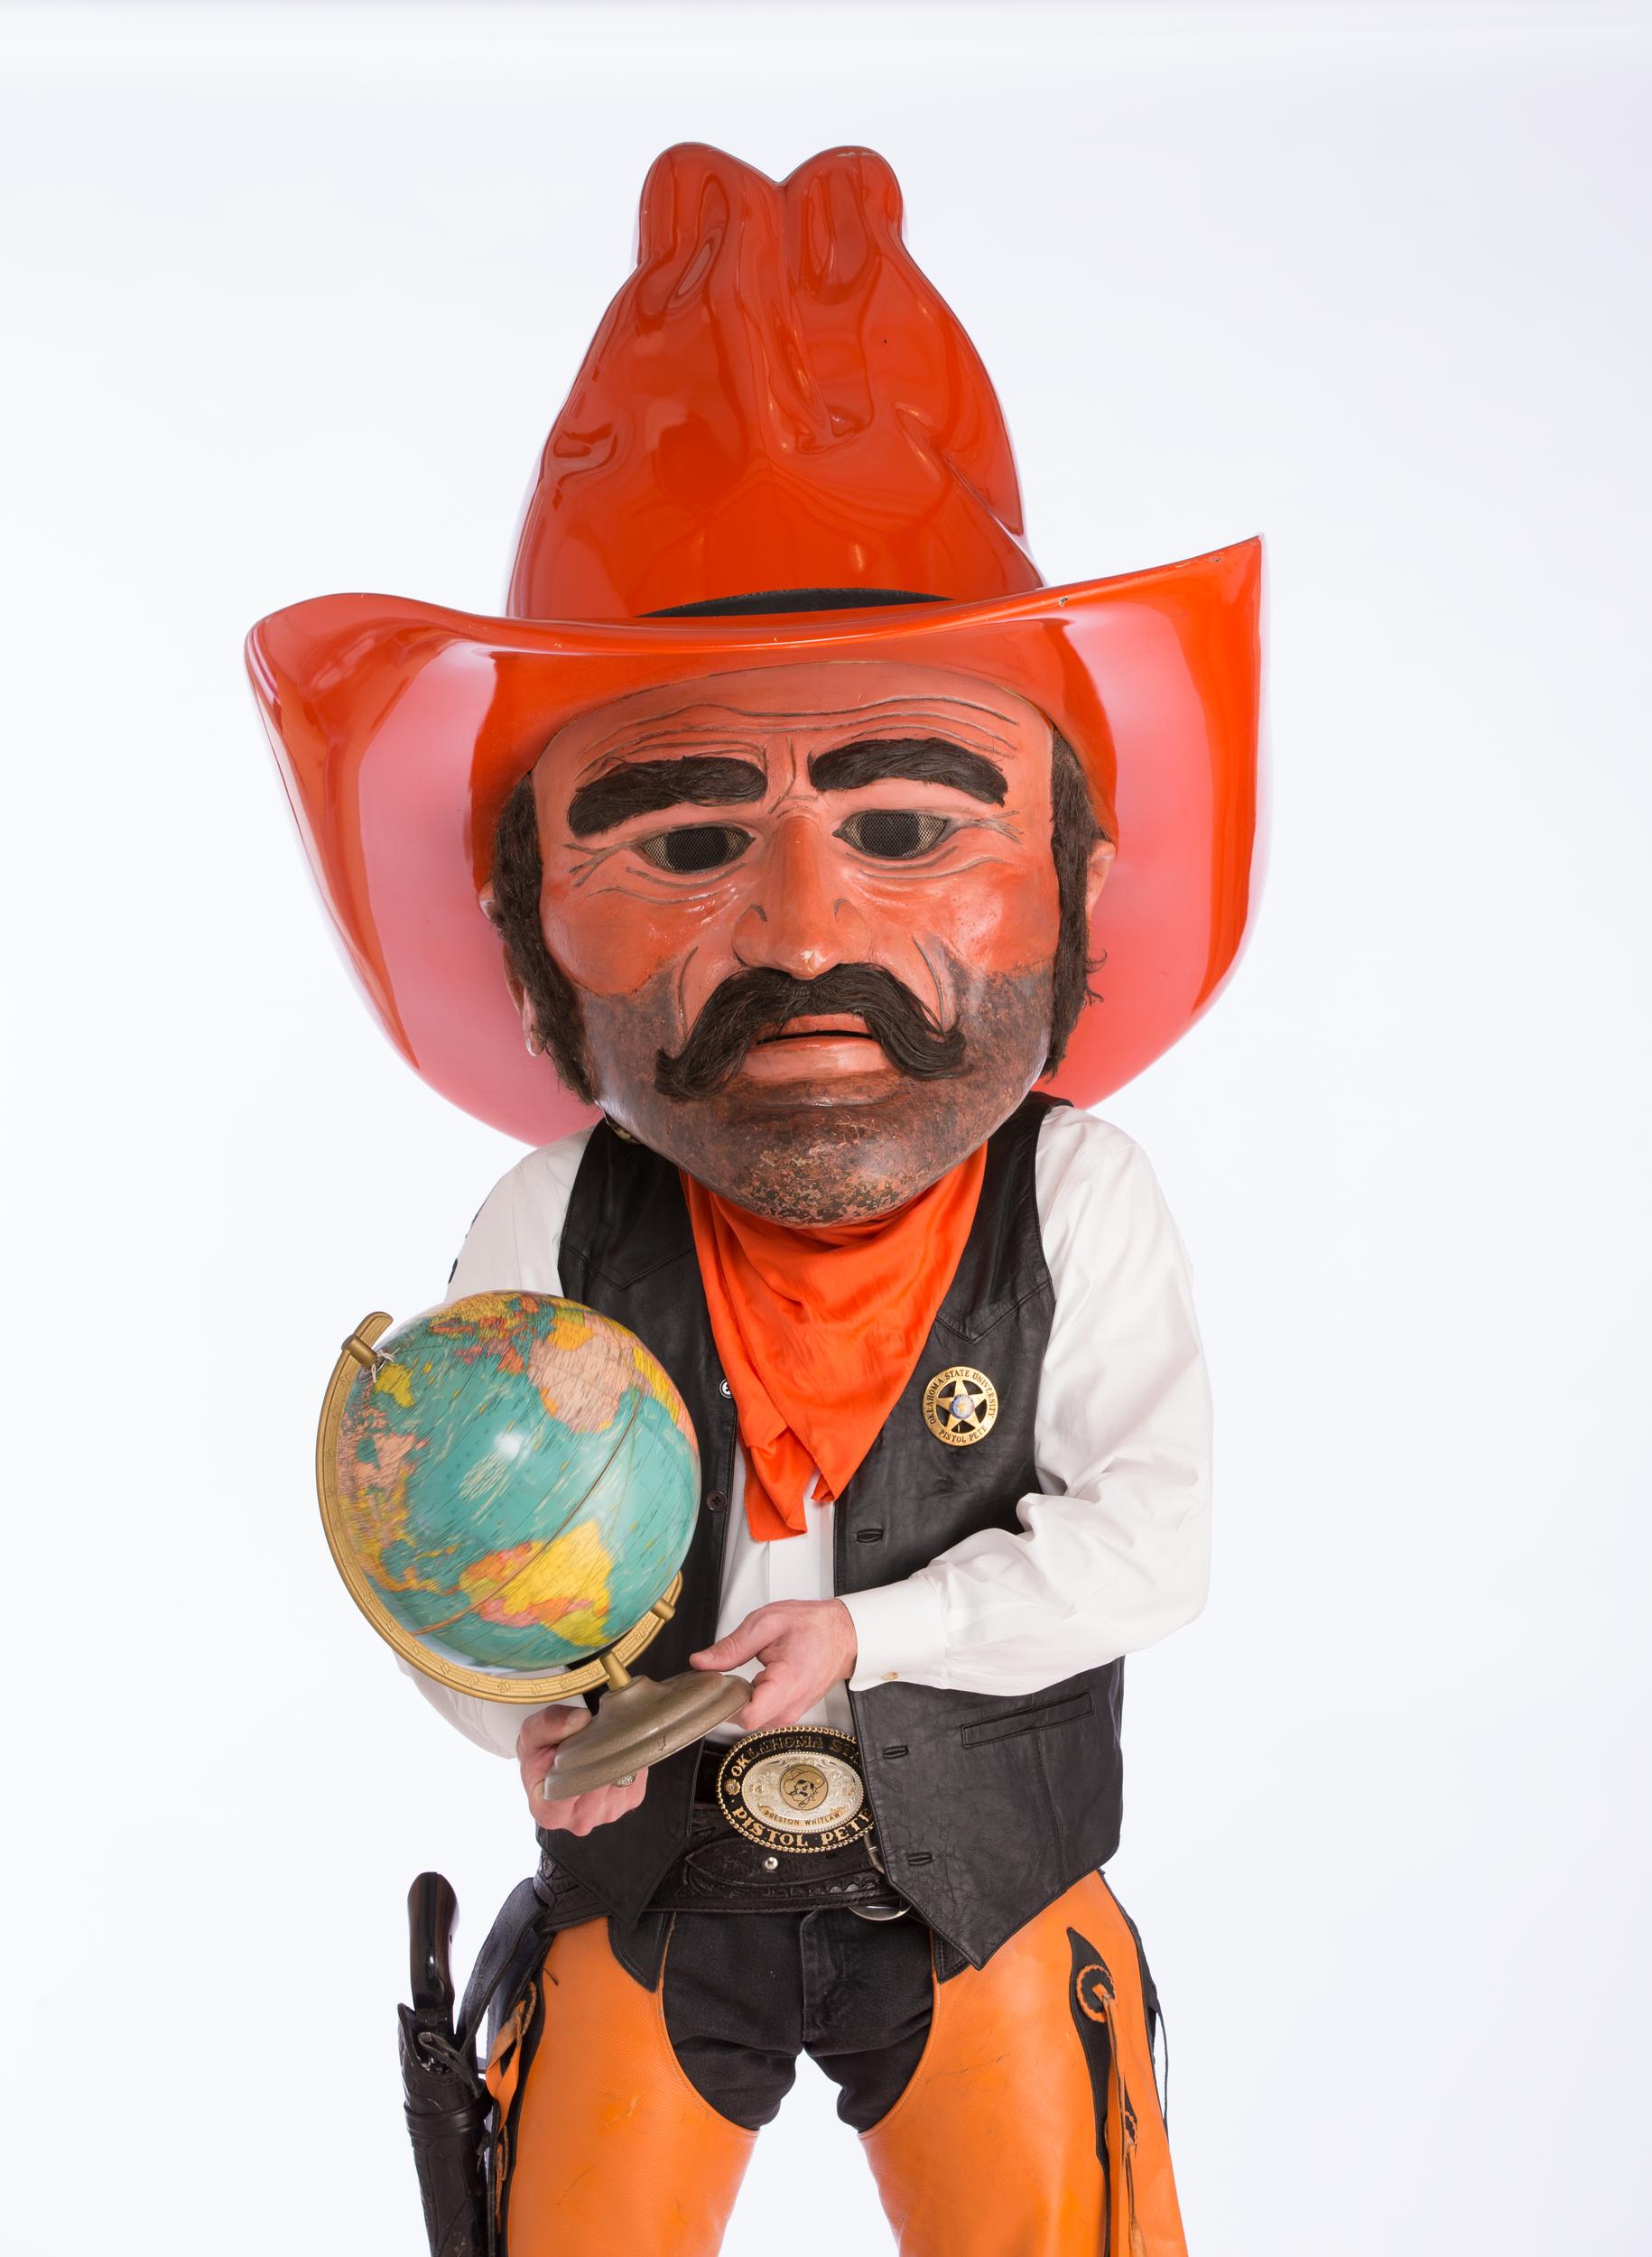 Pistol Pete holds a globe as an aid for his presentation aid for his speech.